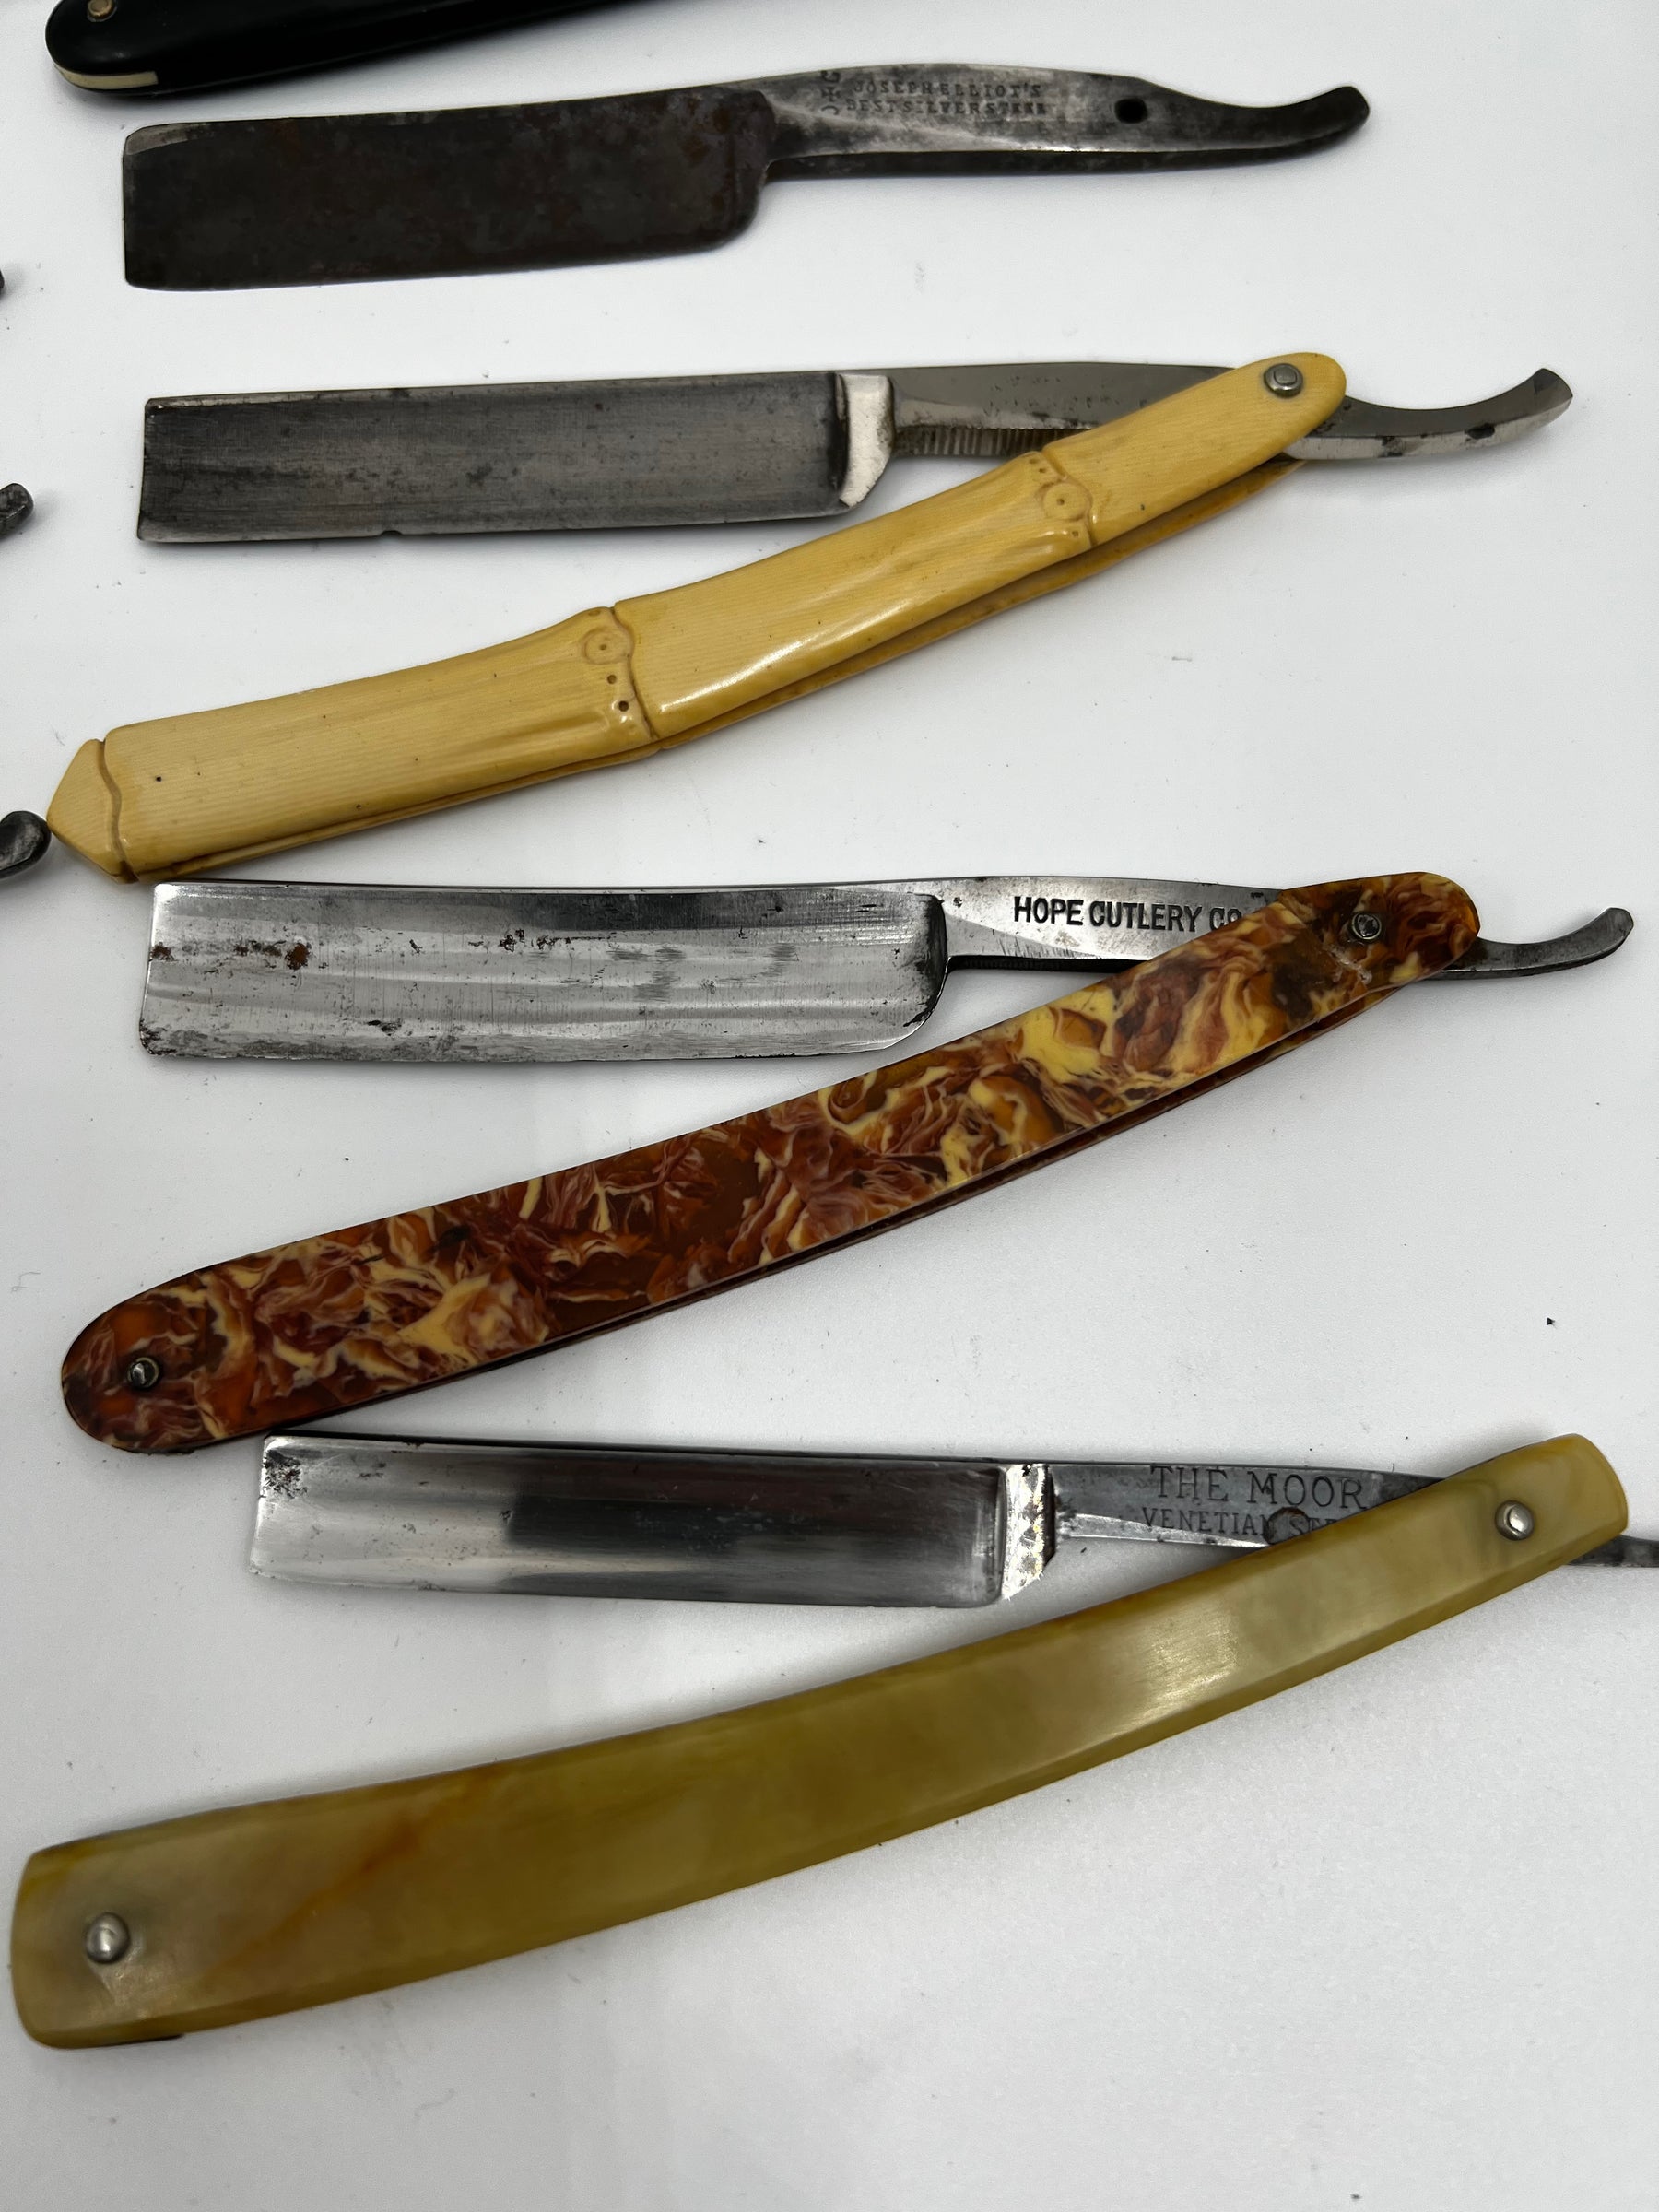 Vintage 10 Straight Razor Lot #18 - May Contain Sheffield, Solingen, Japanese & USA makers, as pictured